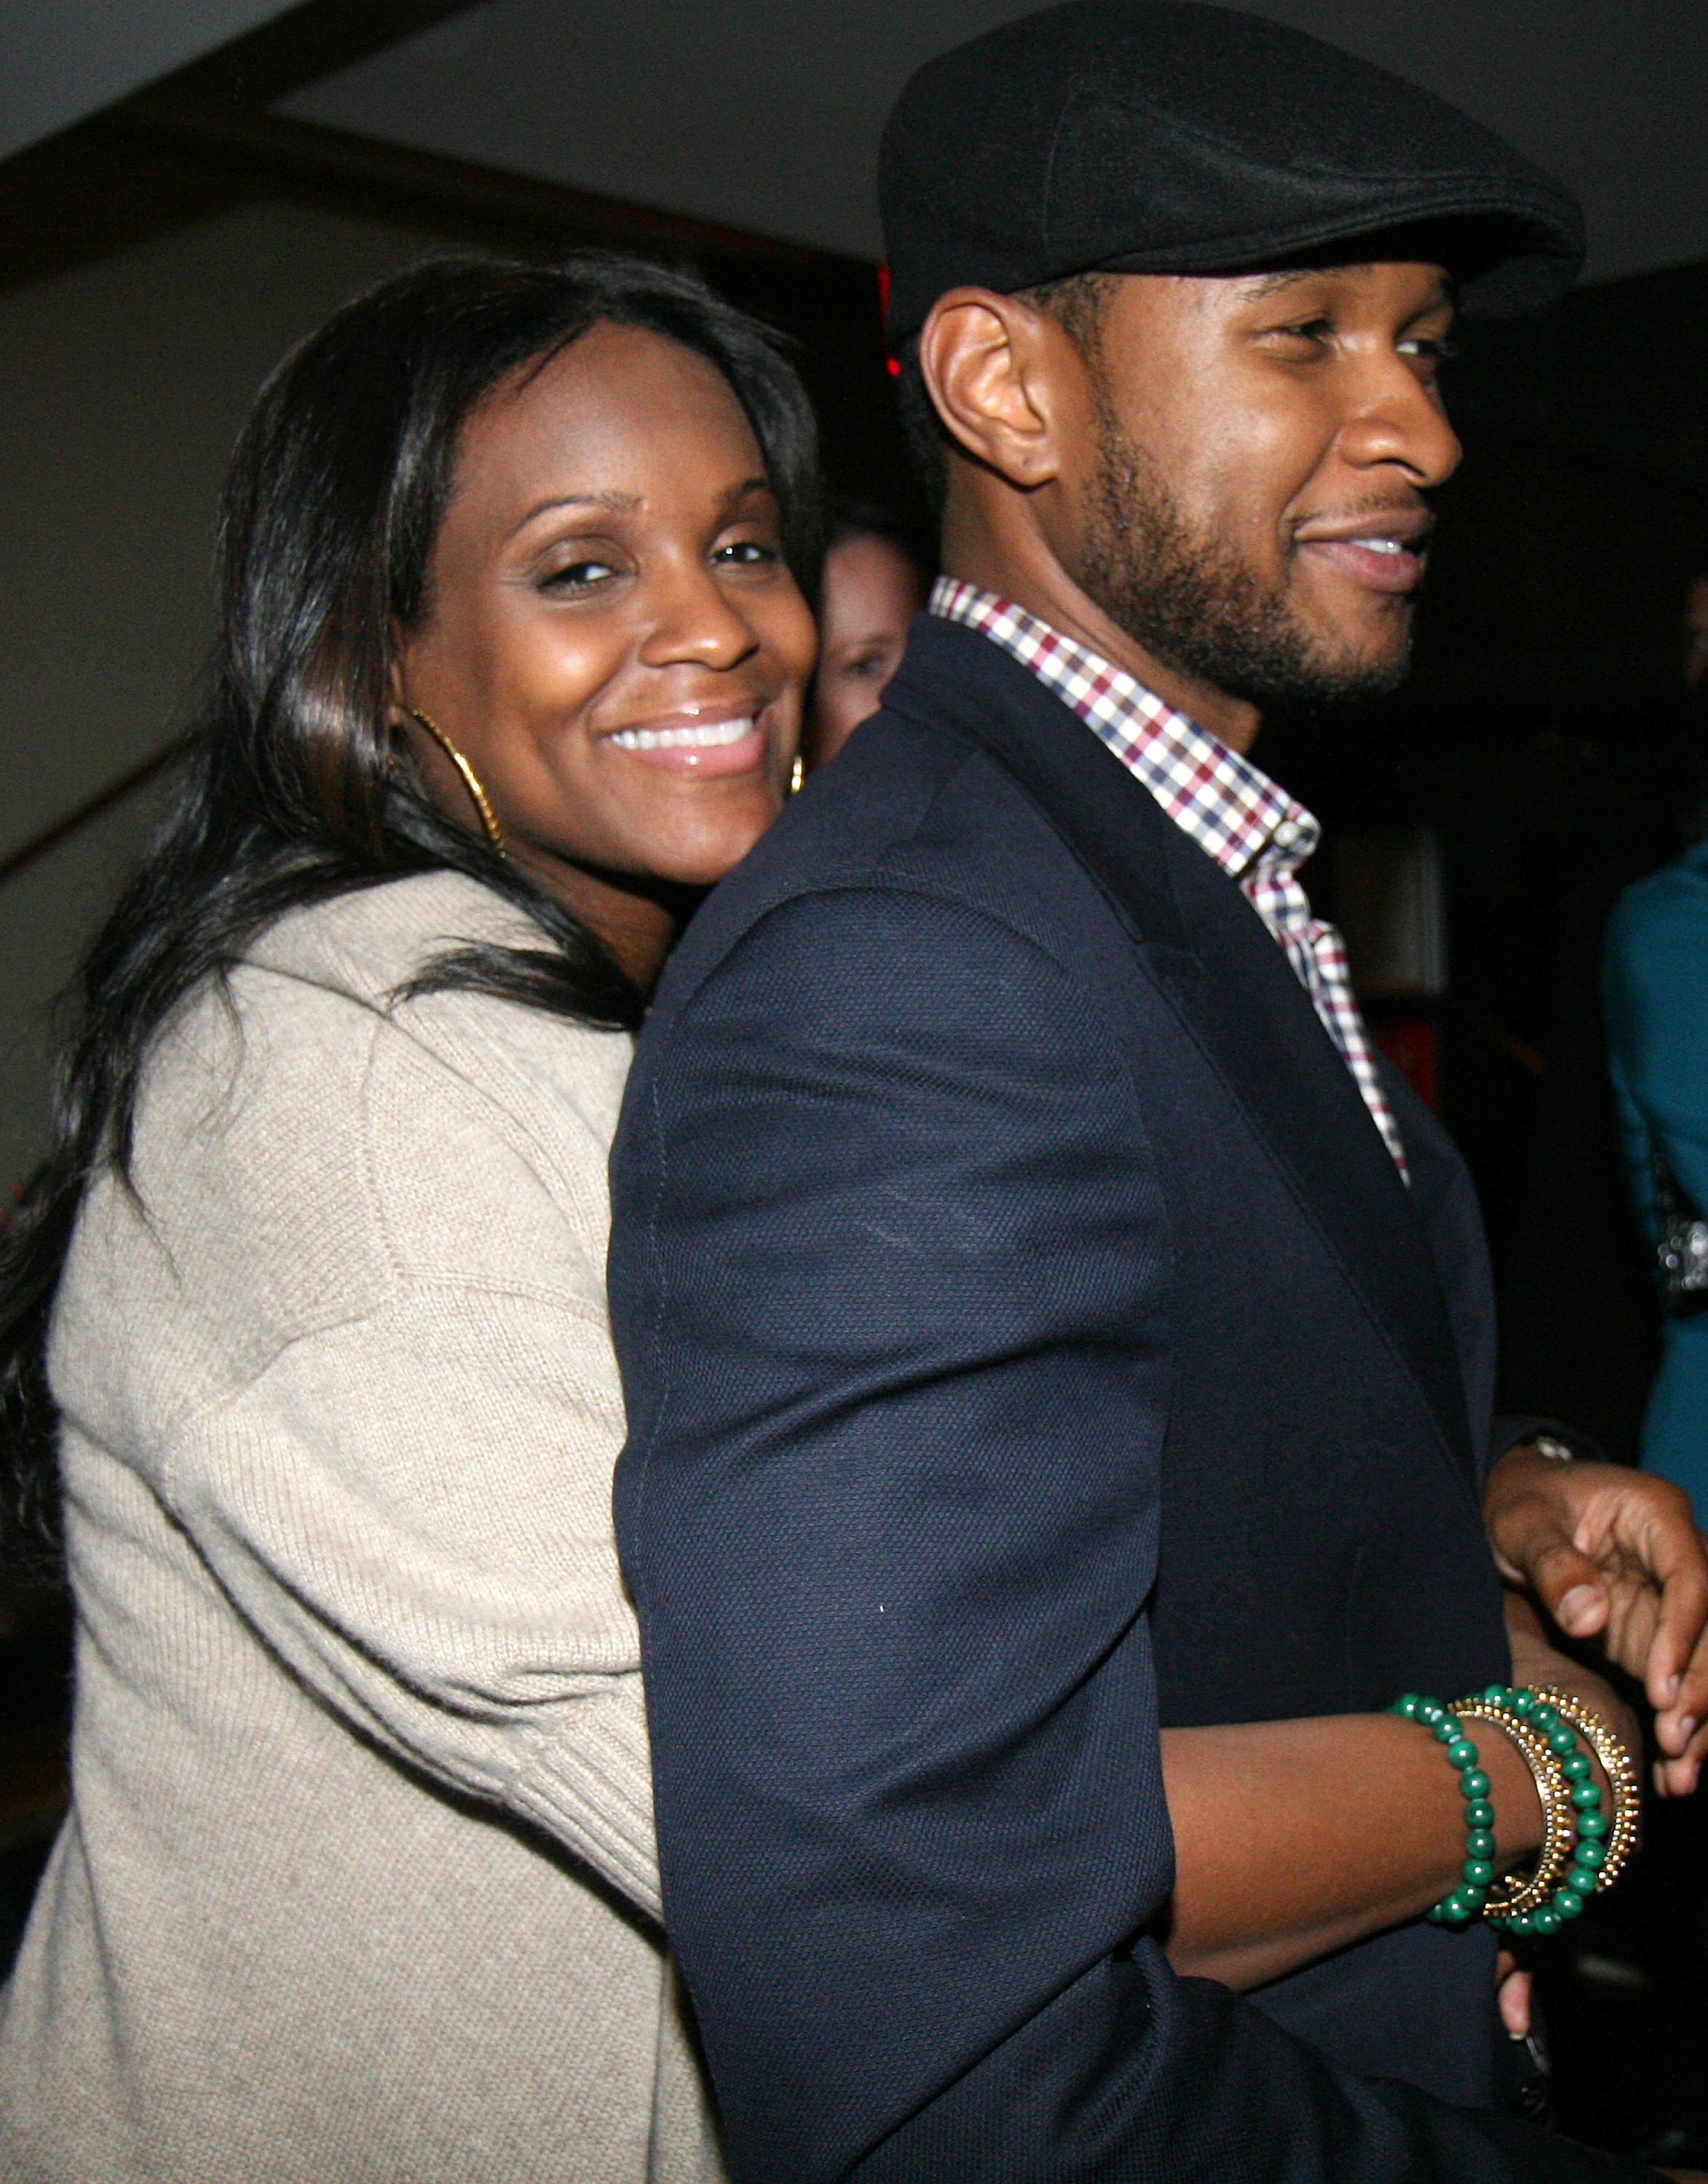 ameka Foster and Usher attends Chris Hicks' Birthday Dinner September 26, 2007, in New York City. | Source: Getty Images